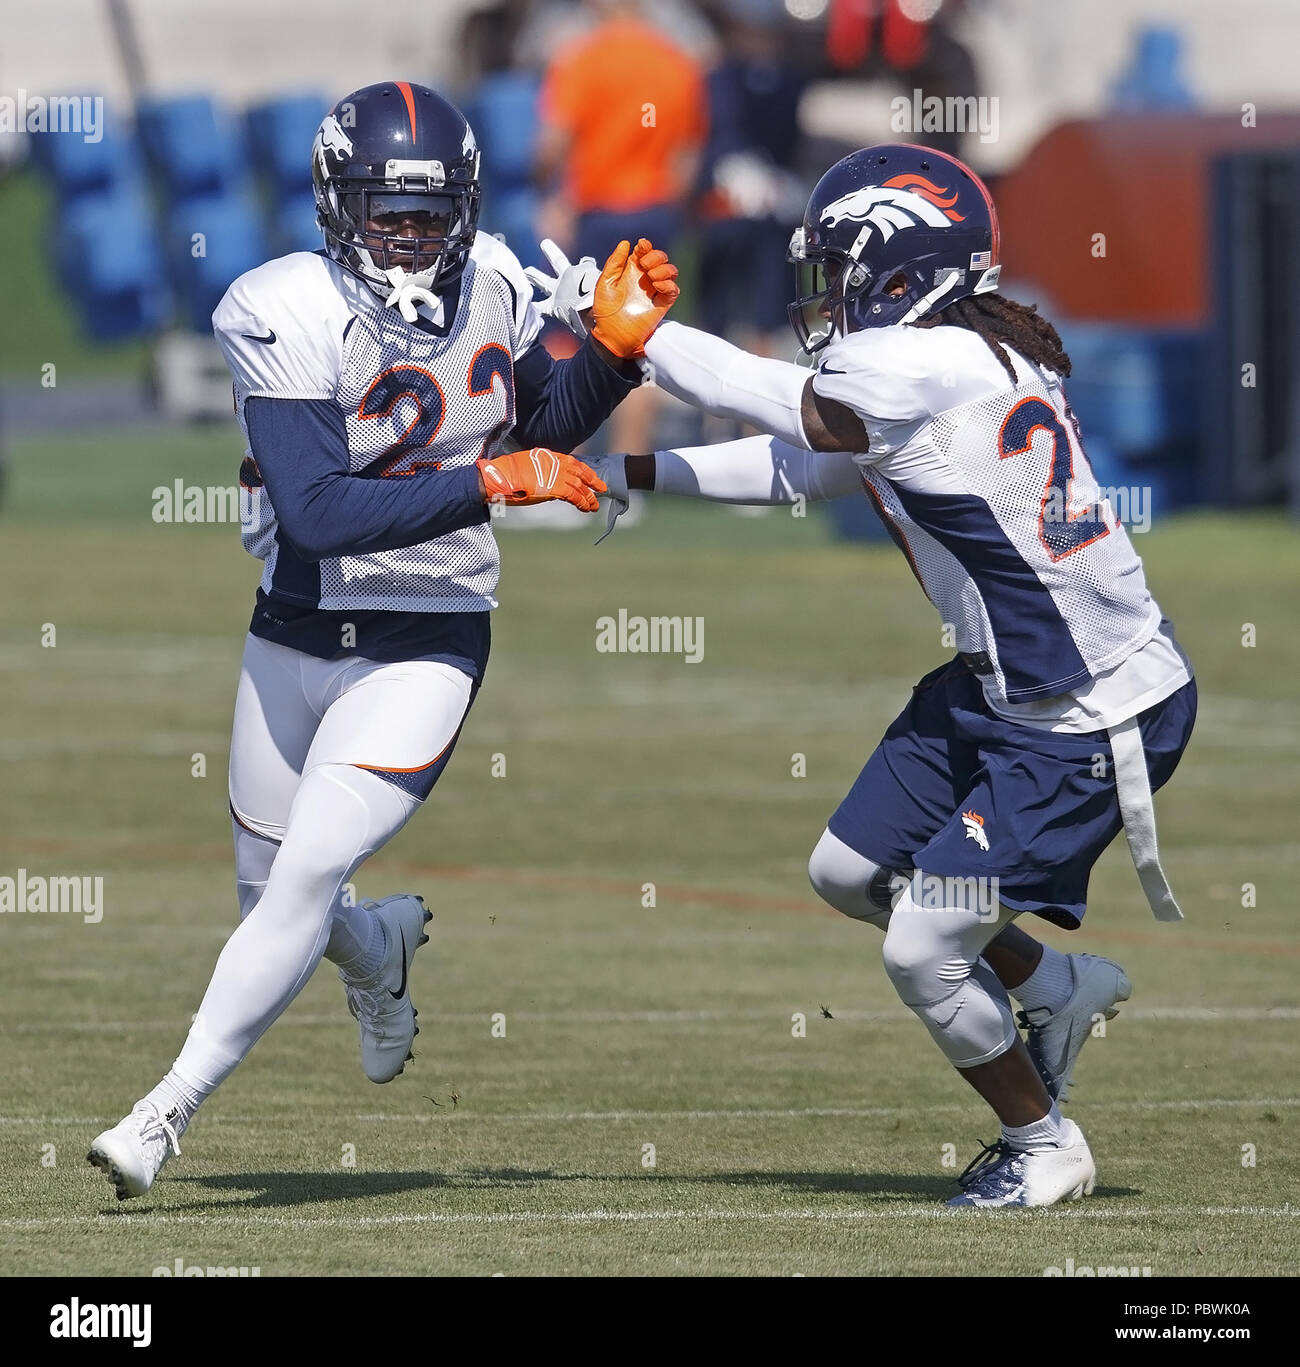 Englewood, Colorado, USA. 30th July, 2018. Broncos CB TRAMAINE BROCK, left, runs through Defensive drills with team mate CB BRADLEY ROBY, right, during the Broncos 3rd. day of Training Camp at UC Health Training Facility at Dove Valley Sunday Morning. Credit: Hector Acevedo/ZUMA Wire/Alamy Live News Stock Photo